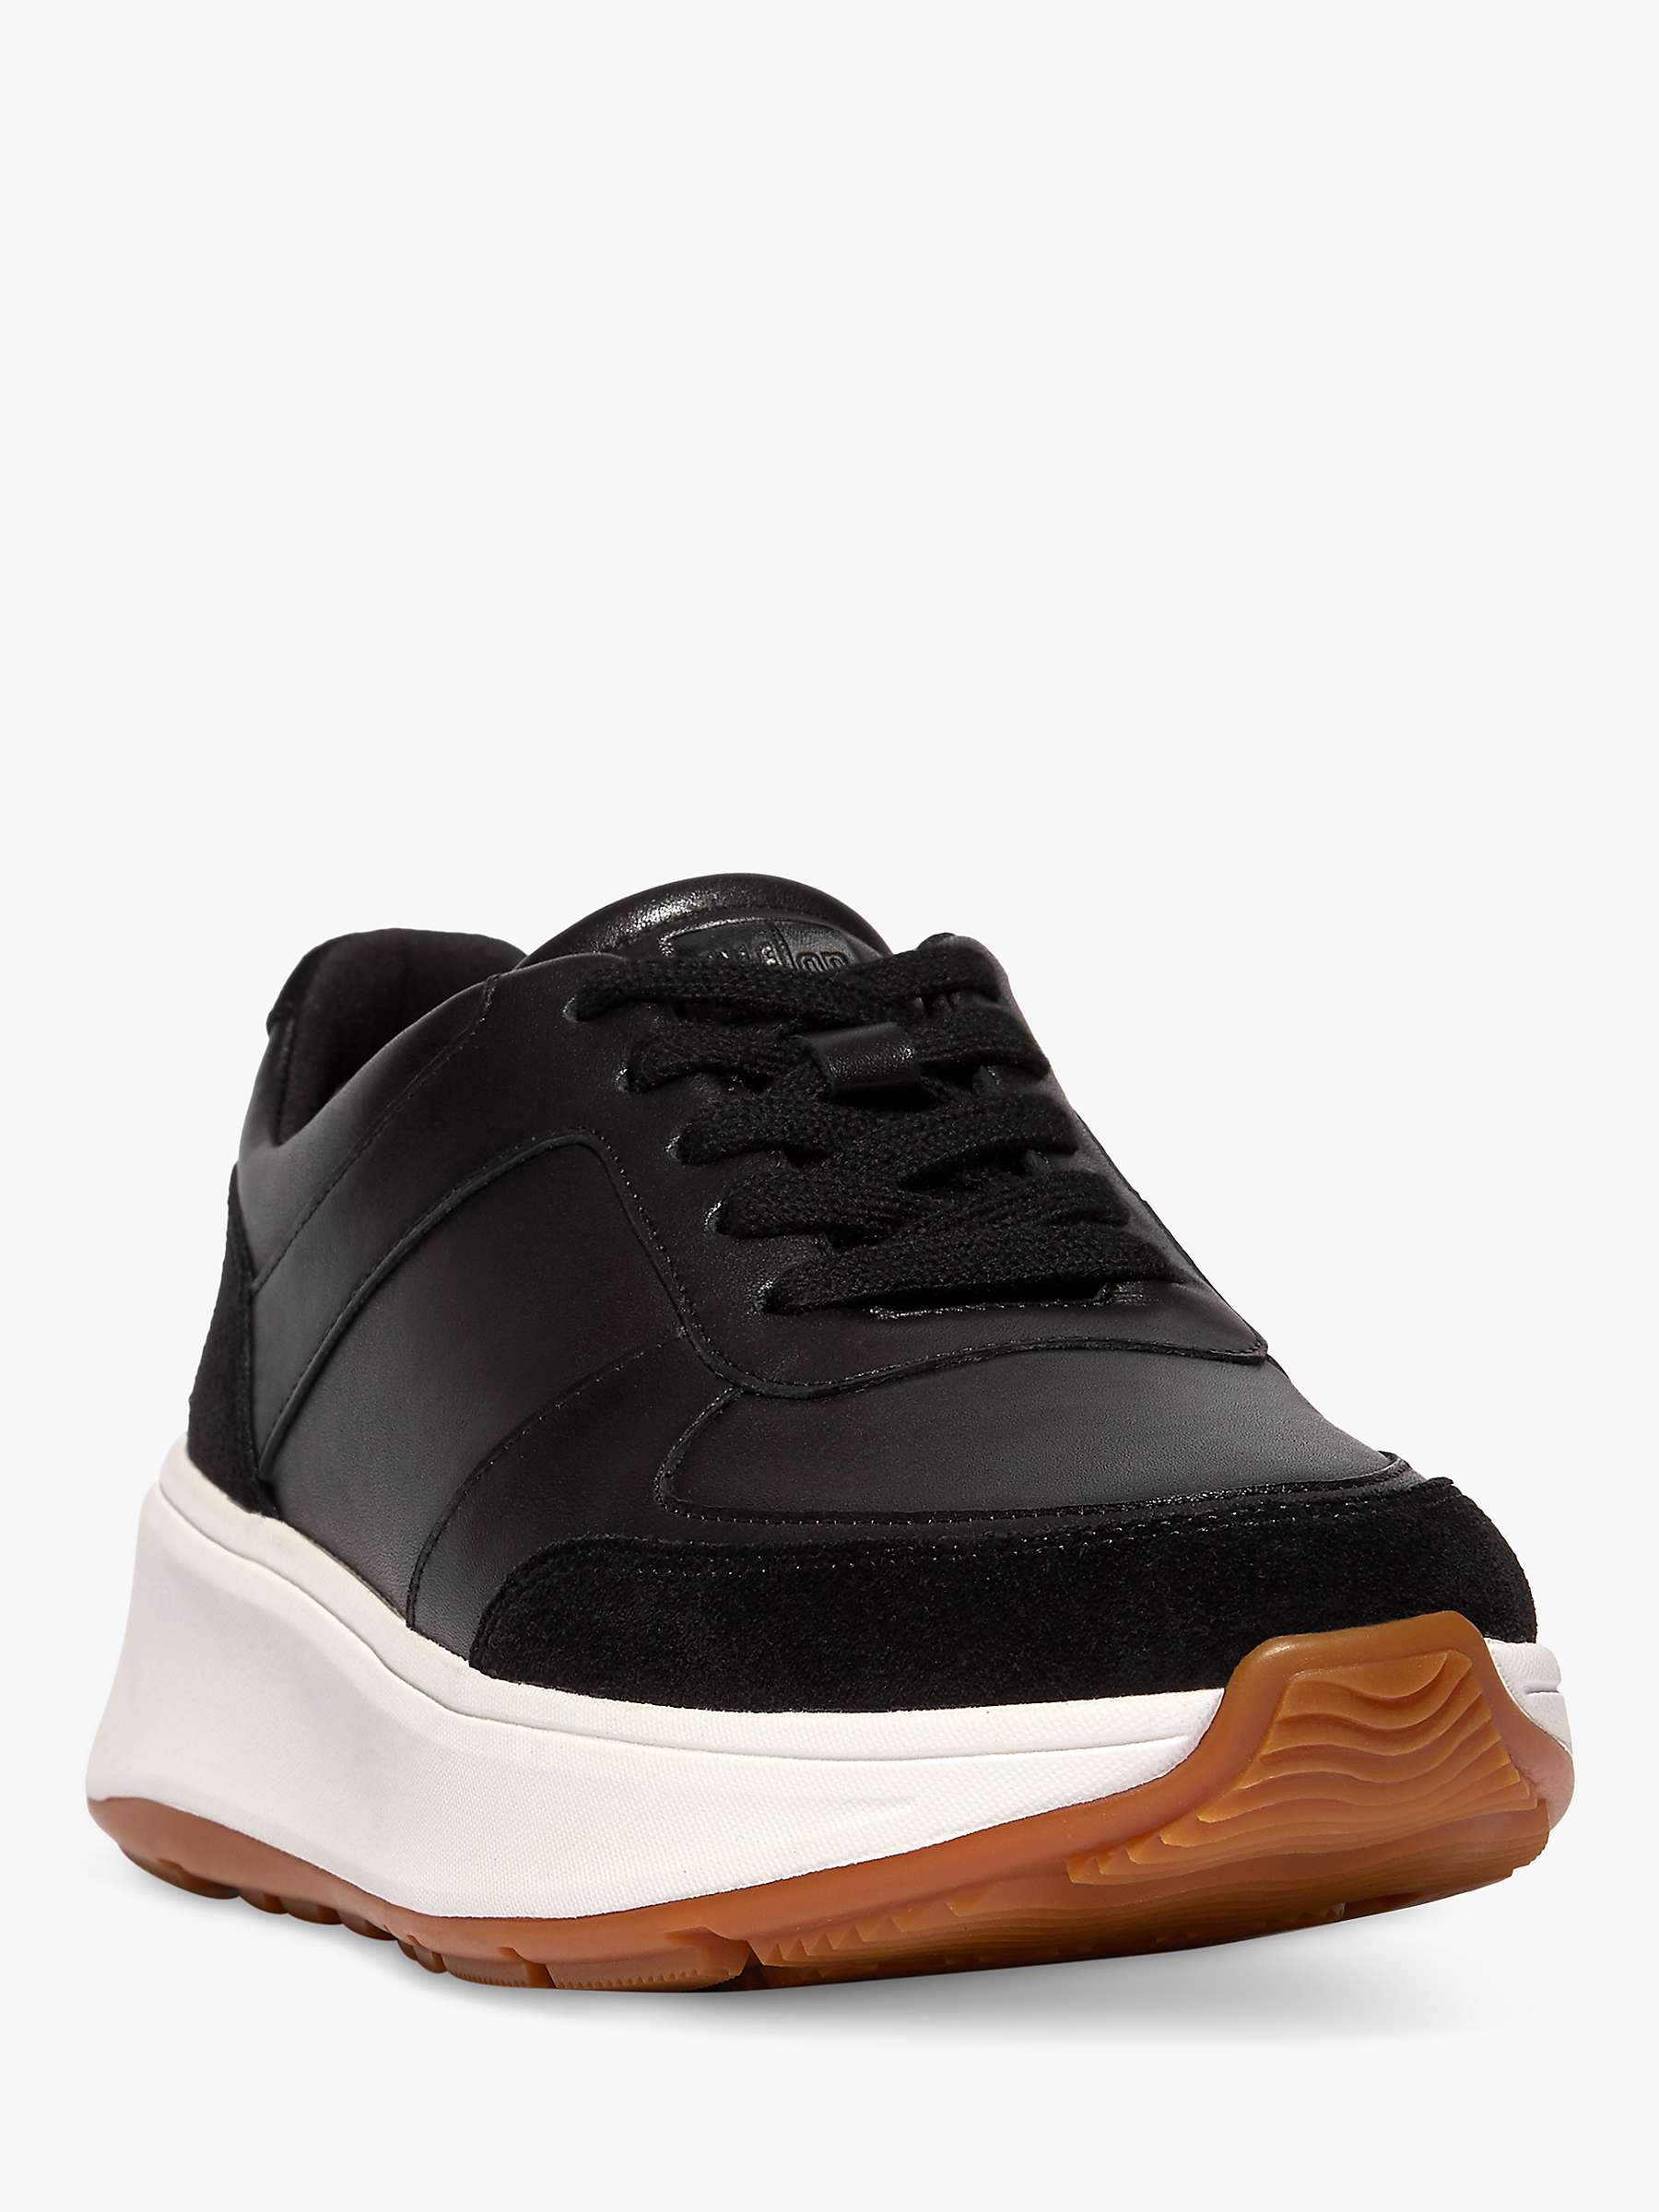 Buy FitFlop Stacked Leather Trainers, Black Online at johnlewis.com